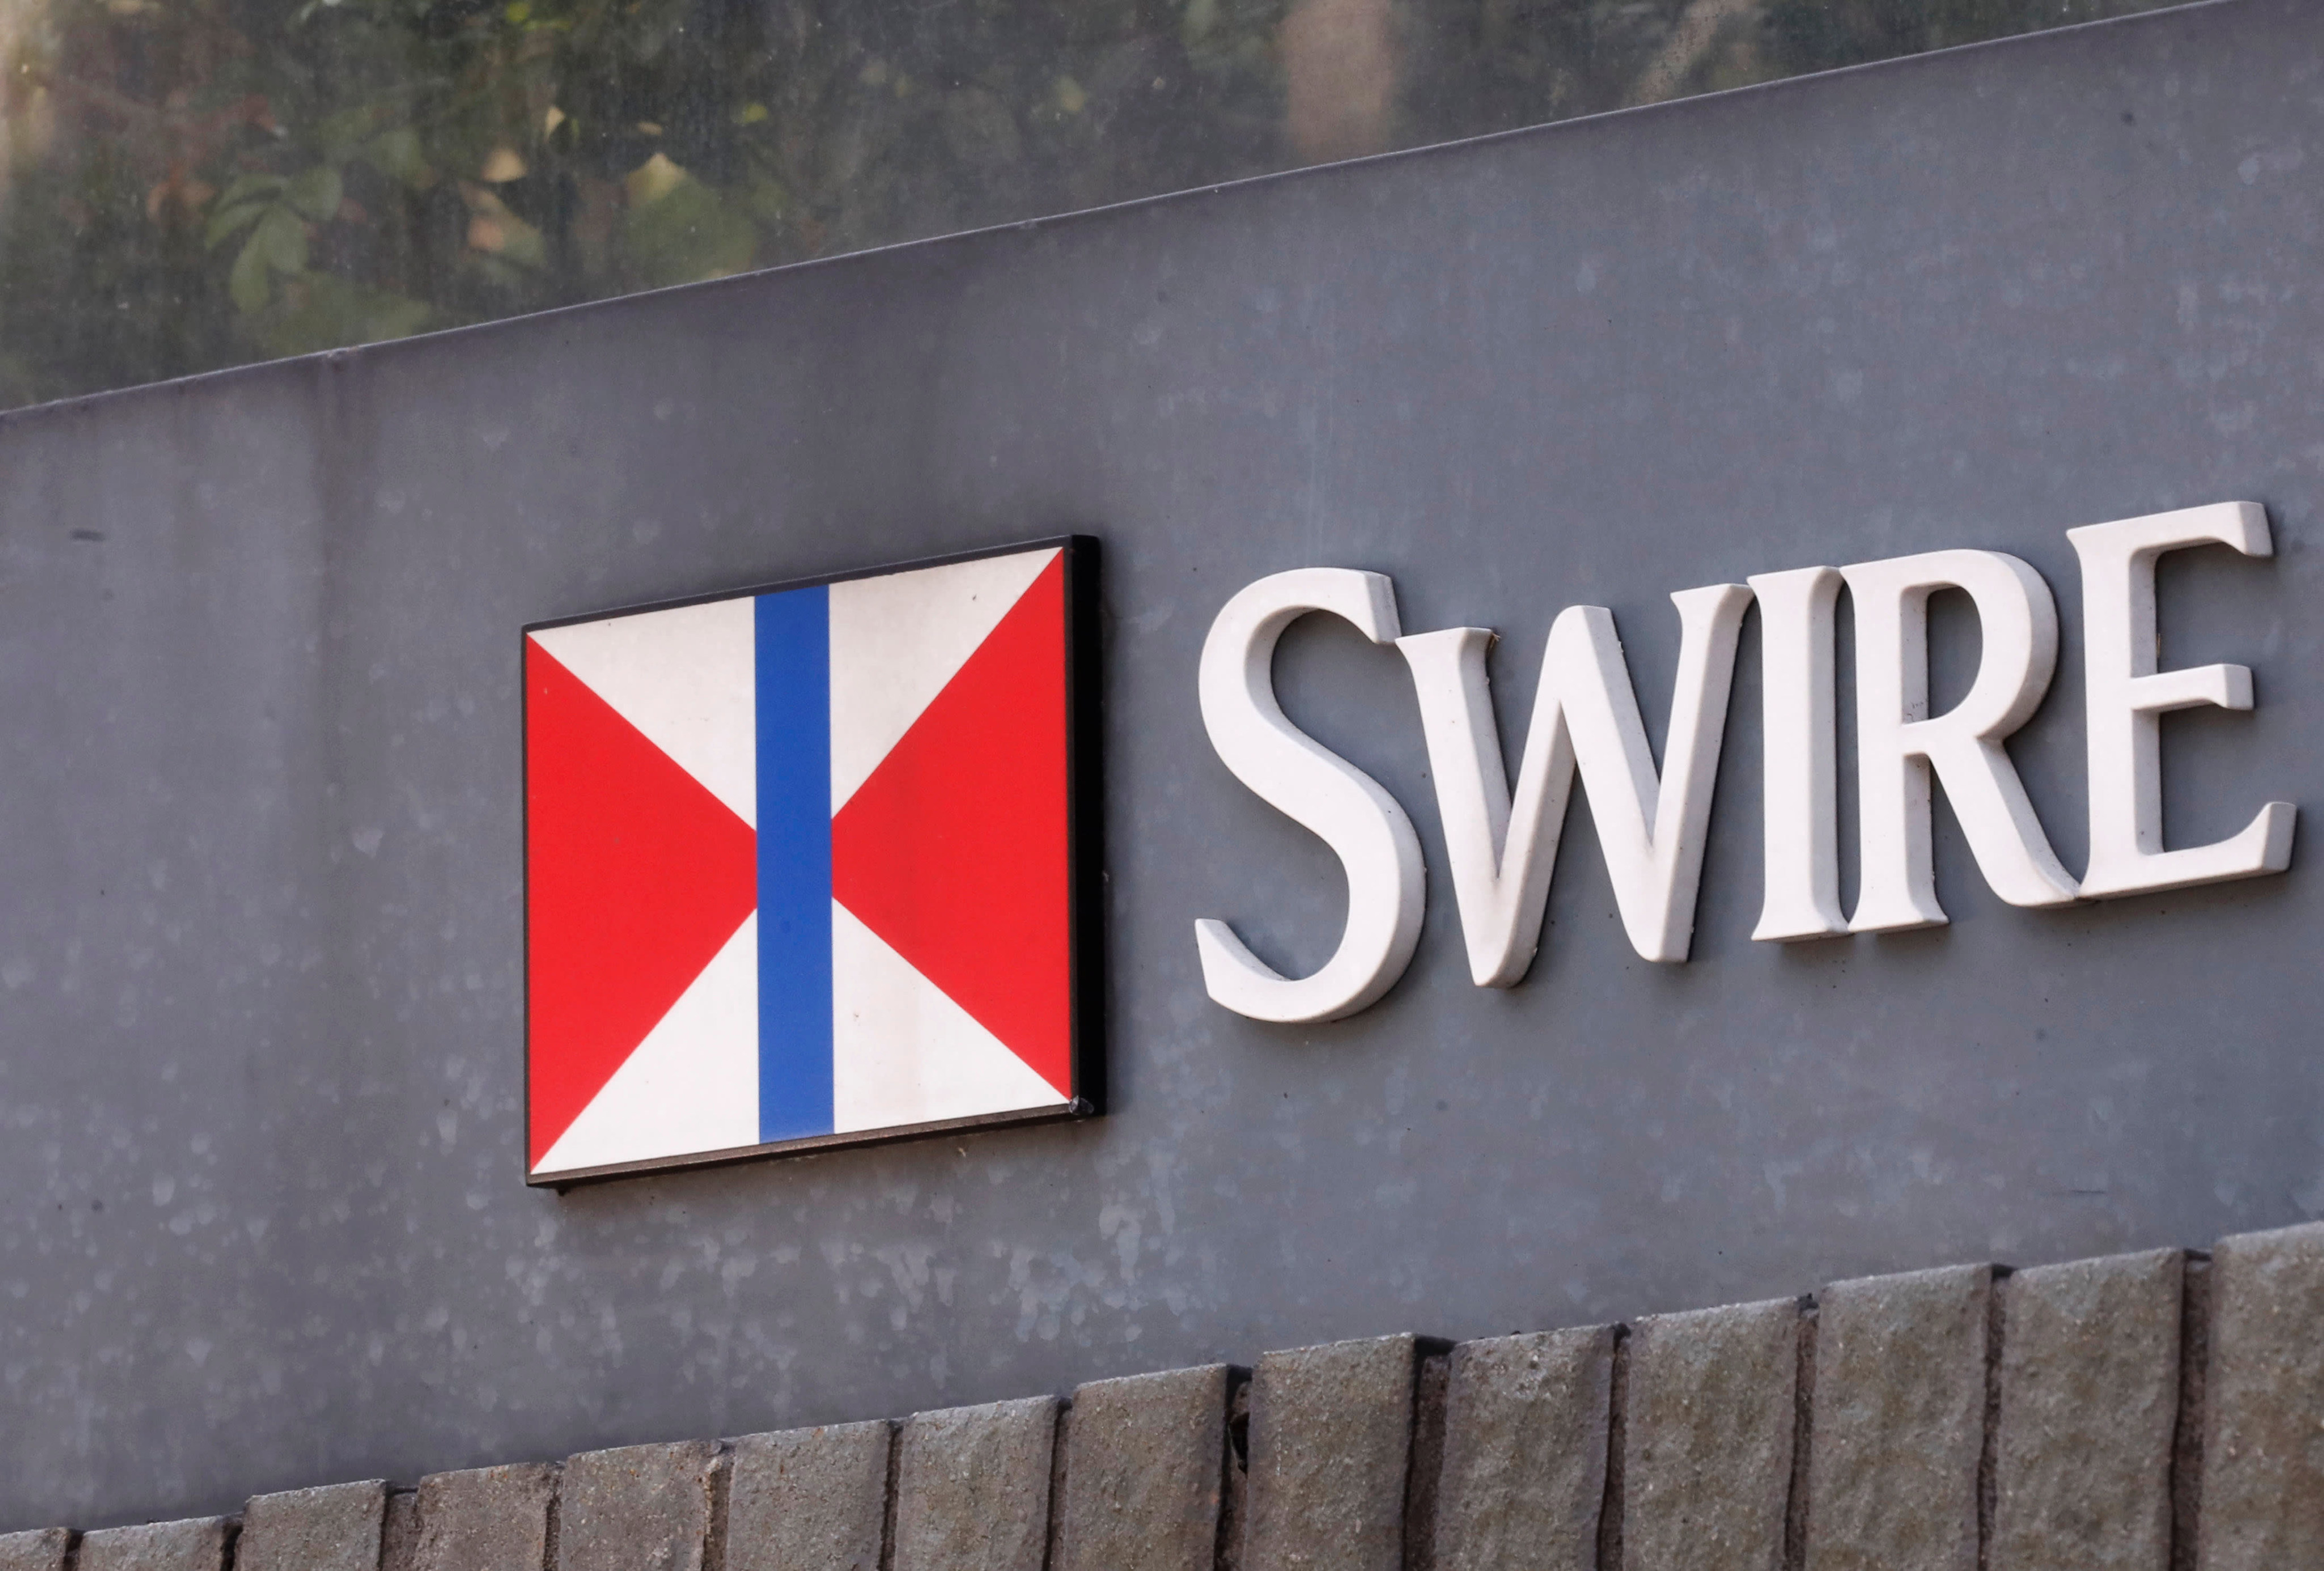 Chairman Guy Bradley says economies free of pandemic curbs will have a significant positive impact on Swire Pacific’s businesses. Photo: Reuters